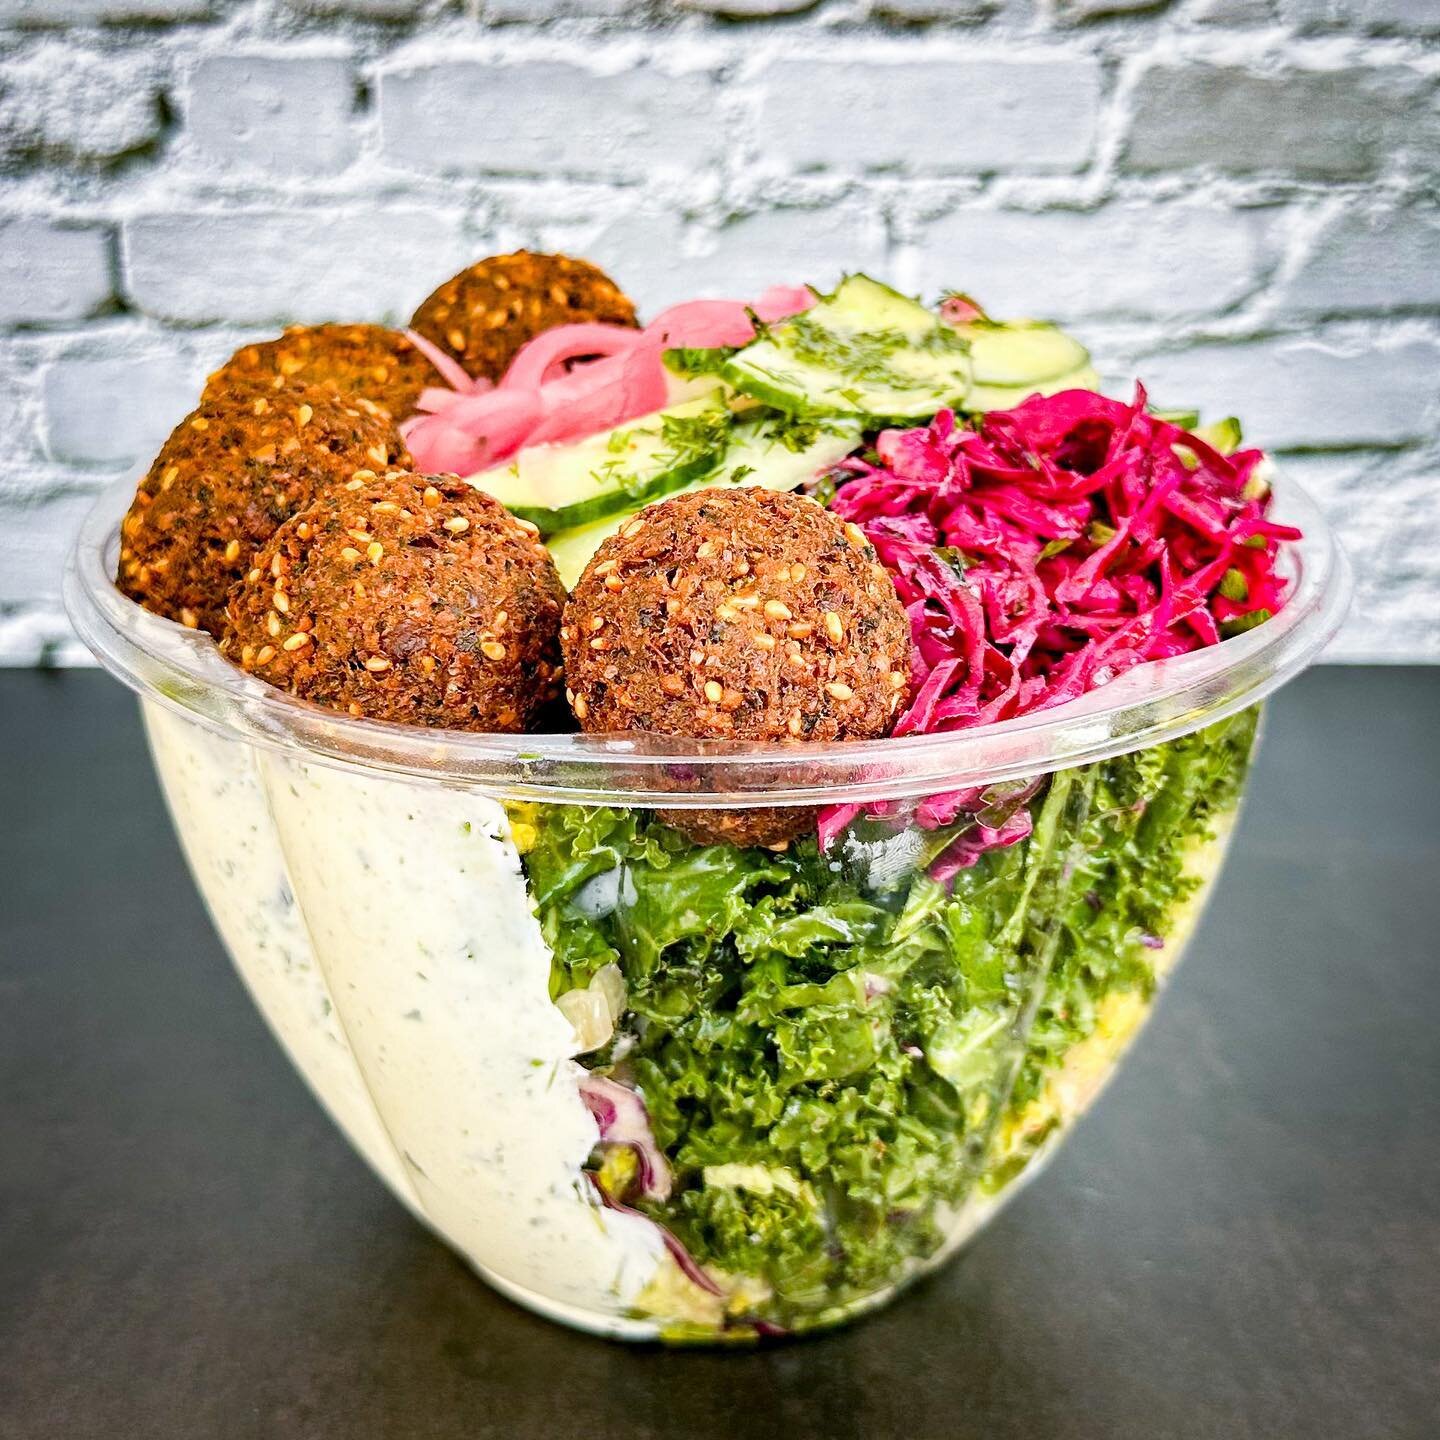 📣New Item Alert!! Here&rsquo;s our newest family member: FalaFeel Salad by @saucy.greens 🤩🥗 You will feel the Mediterranean breeze with super-delicious falafel balls in a non-ordinary saucy salad 🧆

Order Now via 👉 gastroboteats.com 🛒
.
.
.
.
.